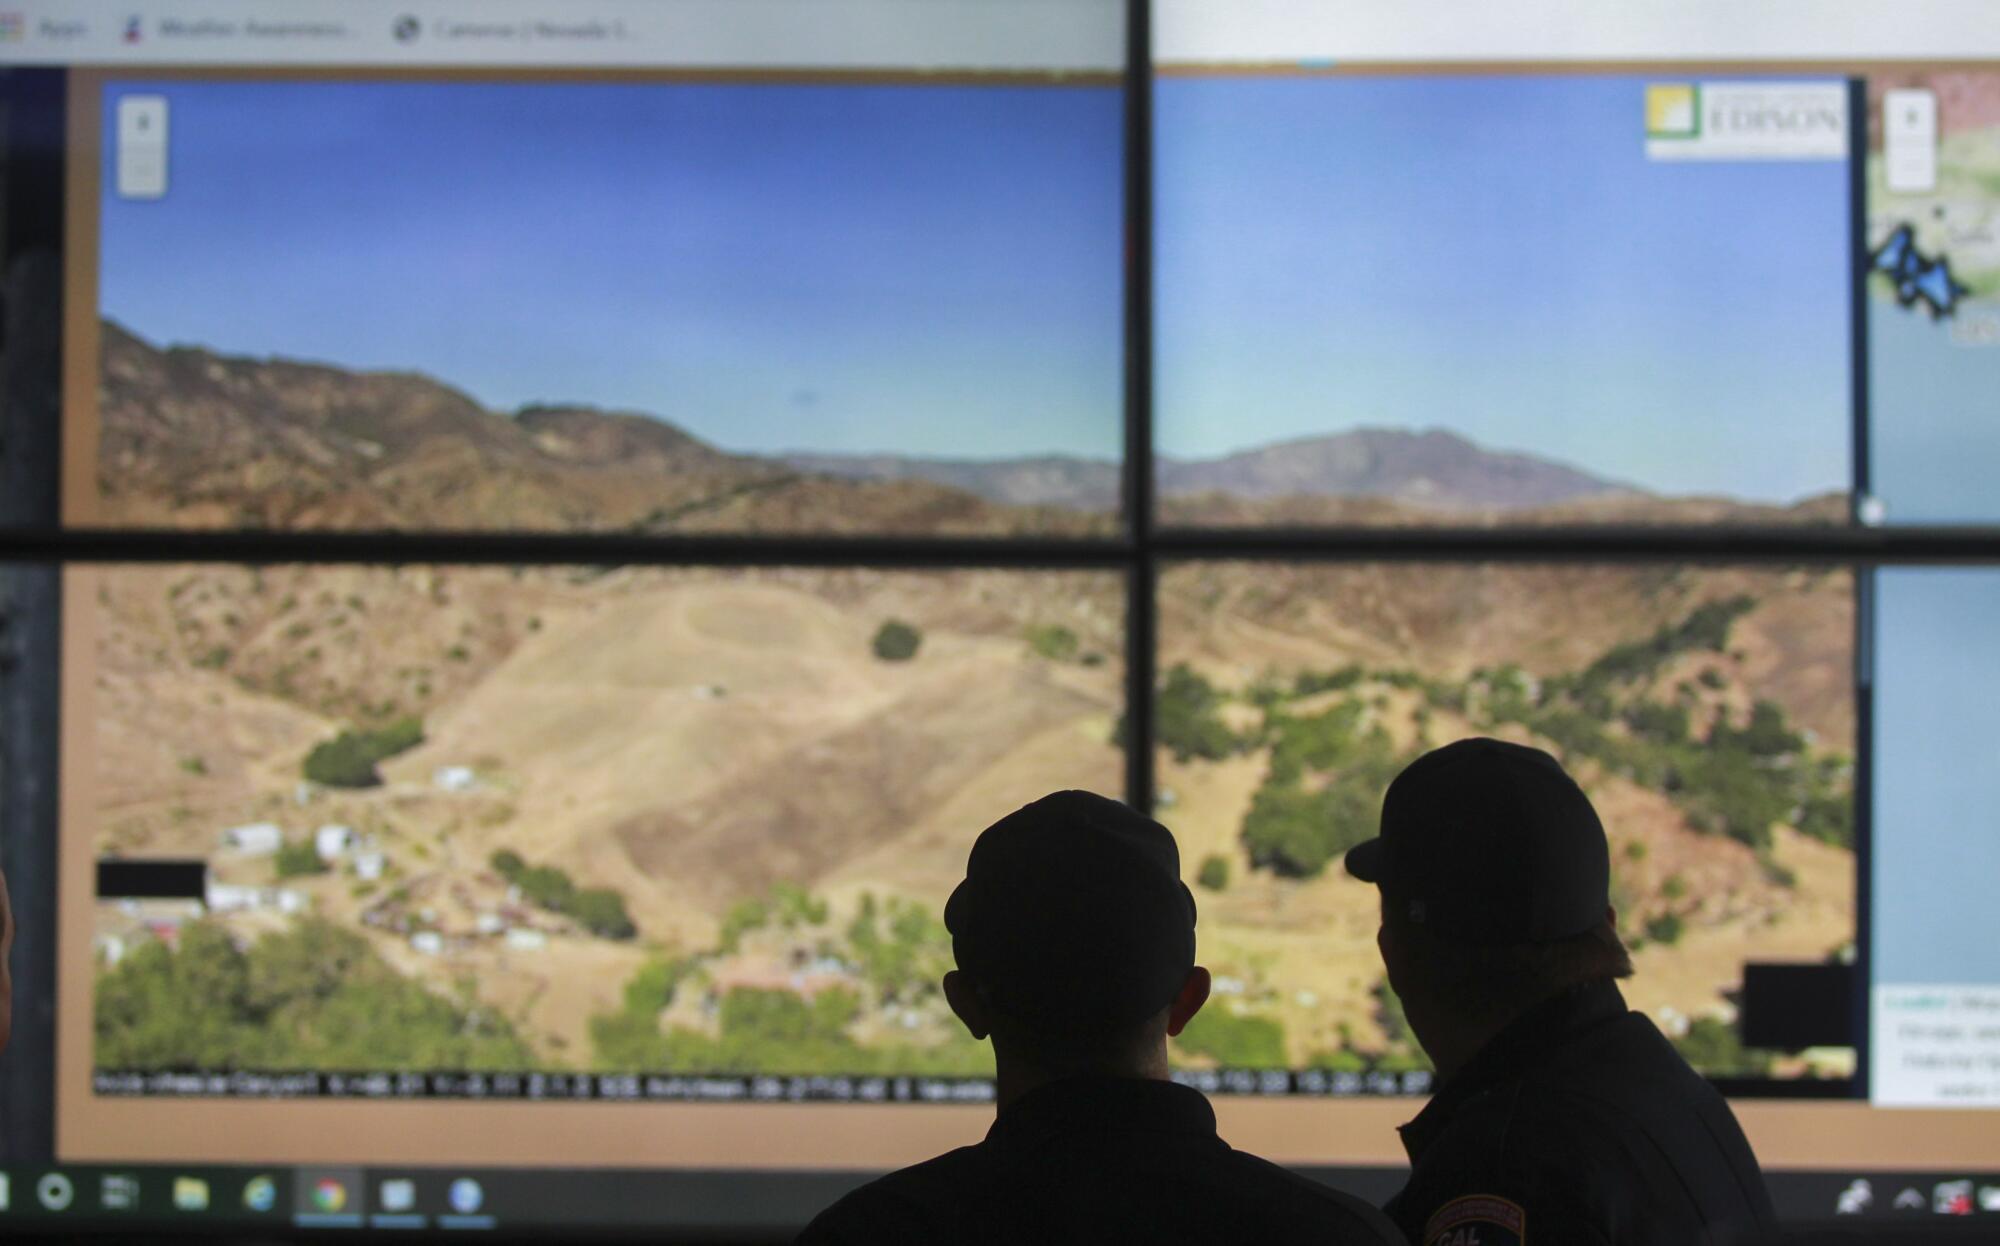 Cal Fire captains Kevin Cox, right, and Ryan Silva look at a screen as they demonstrate the use of wildfire surveillance cameras, mounted on various mountain tops in San Diego County, while in the Cal Fire emergency command center at the Cal Fire San Diego Unit Headquarters on Wednesday, October 23, 2019 in El Cajon, California.